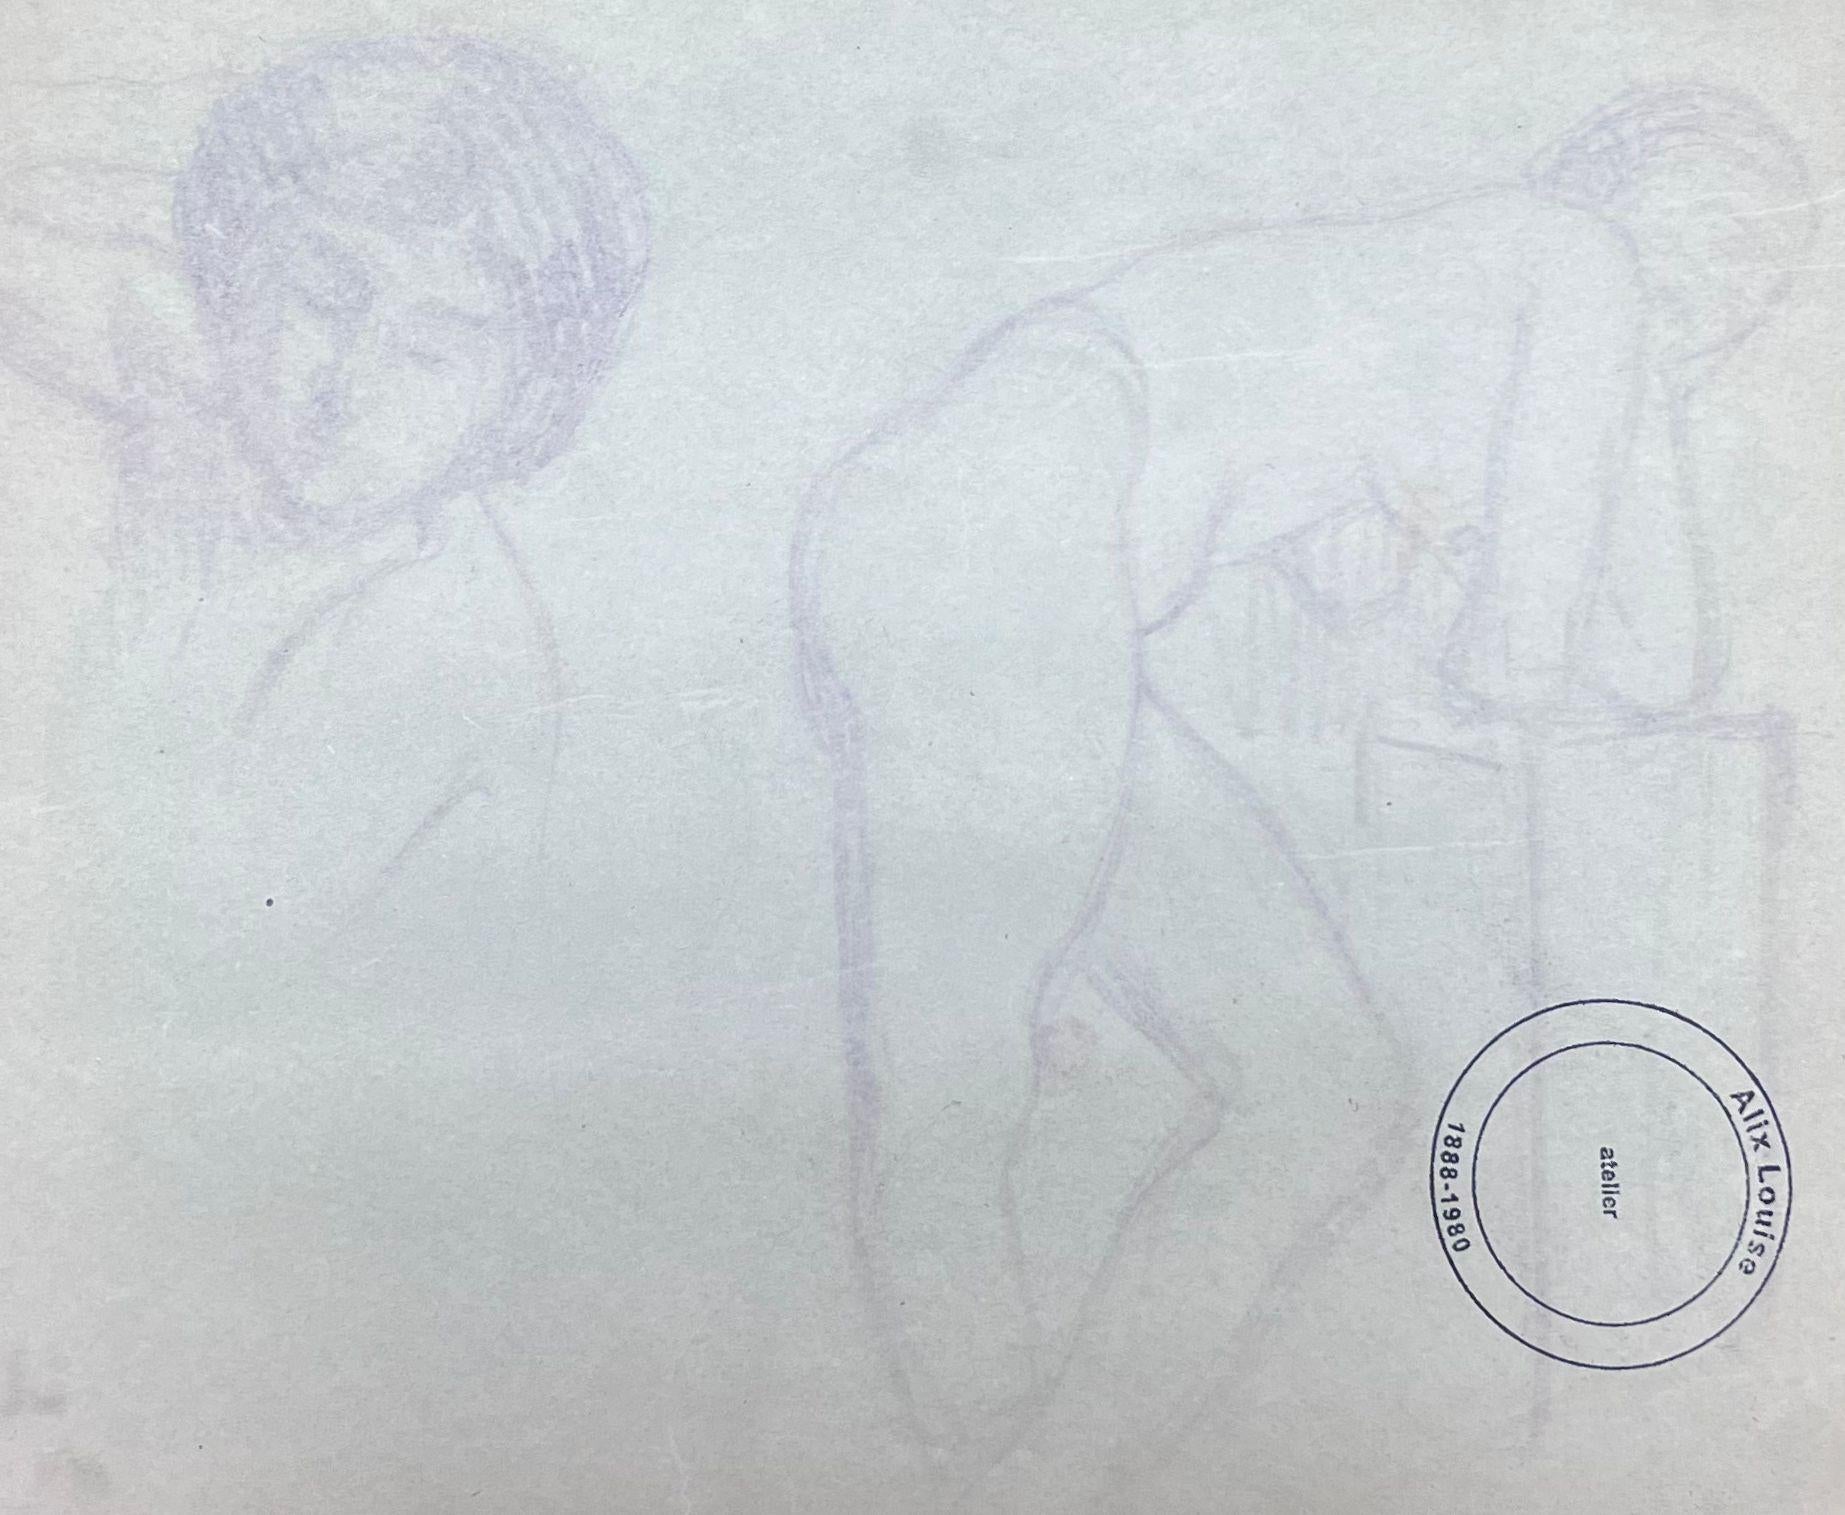 Female Figures
by Louise Alix (French, 1888-1980) *see notes below
provenance stamp to the back 
pencil drawing on artist paper, unframed
measures: 8 high by 10 inches wide
condition: overall very good and sound, a few scuffs and marks to the